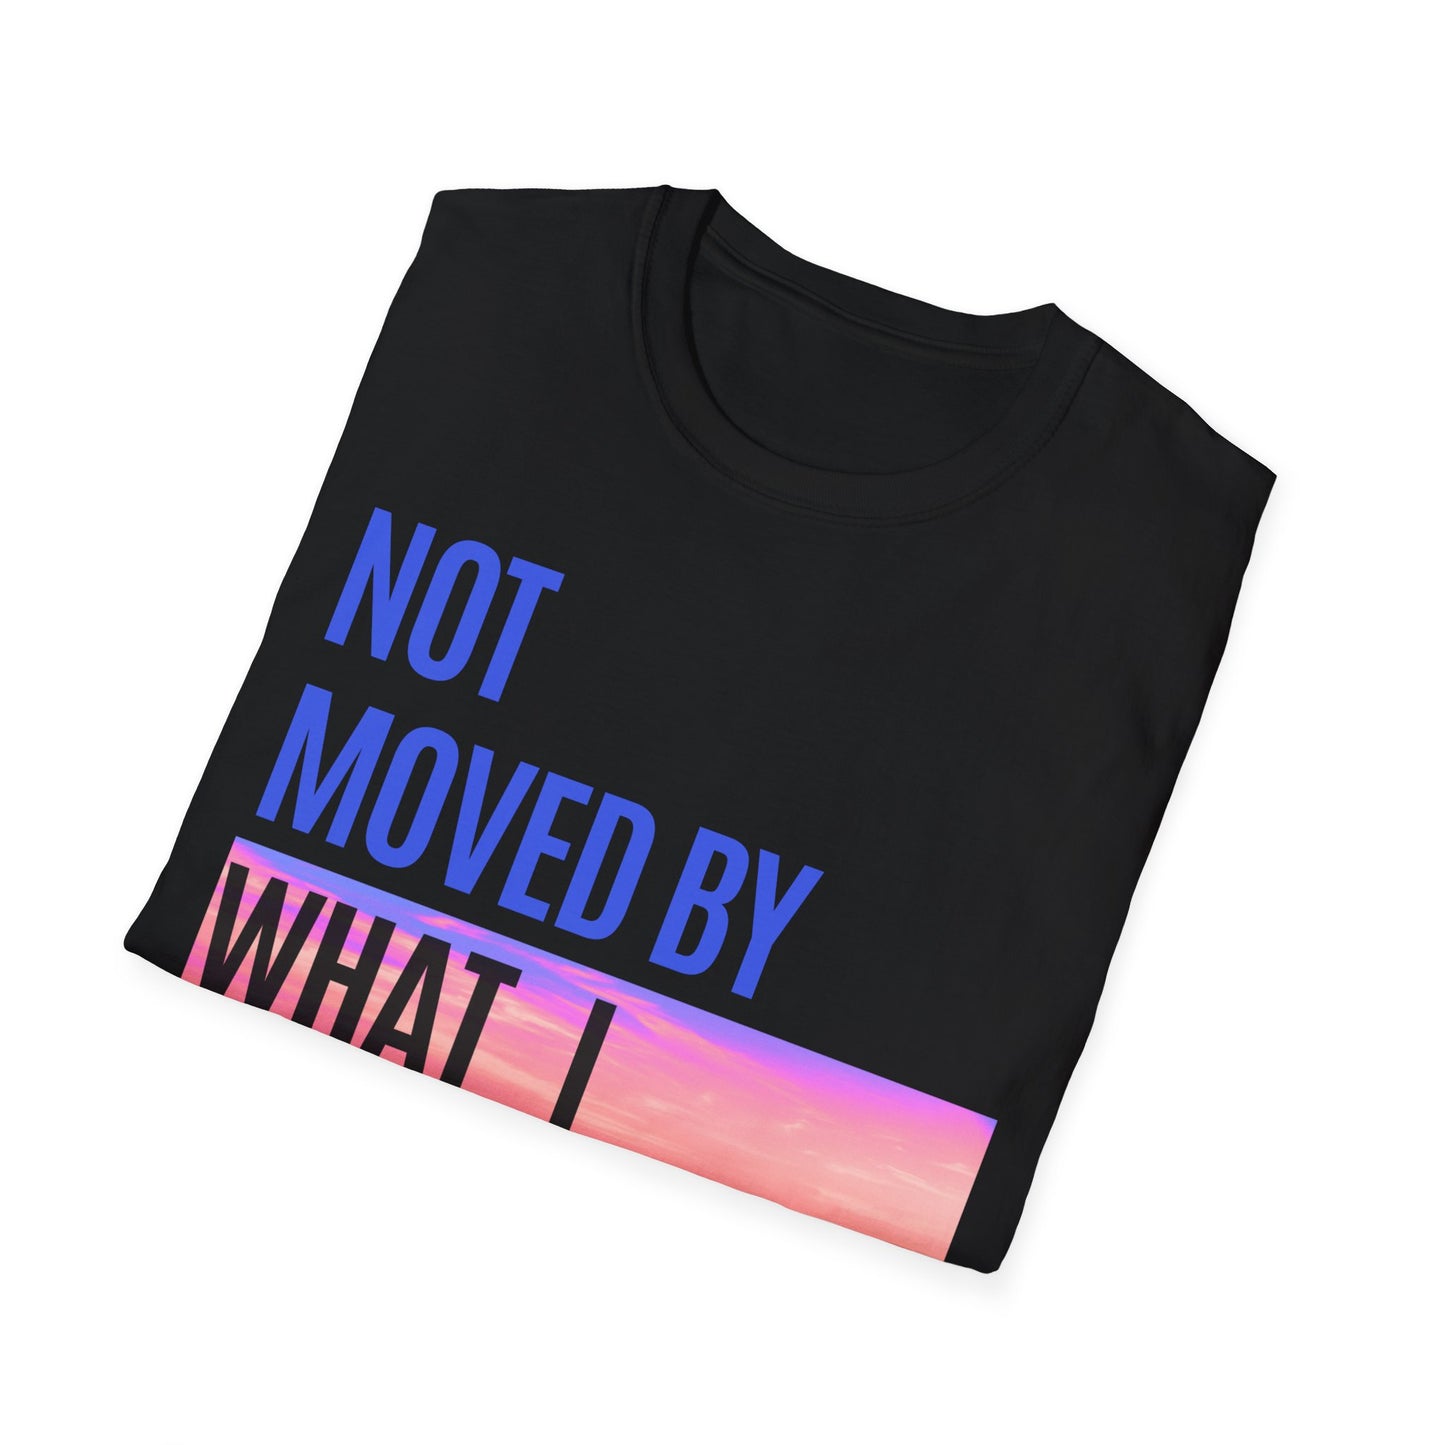 Not Moved By What We See Tee